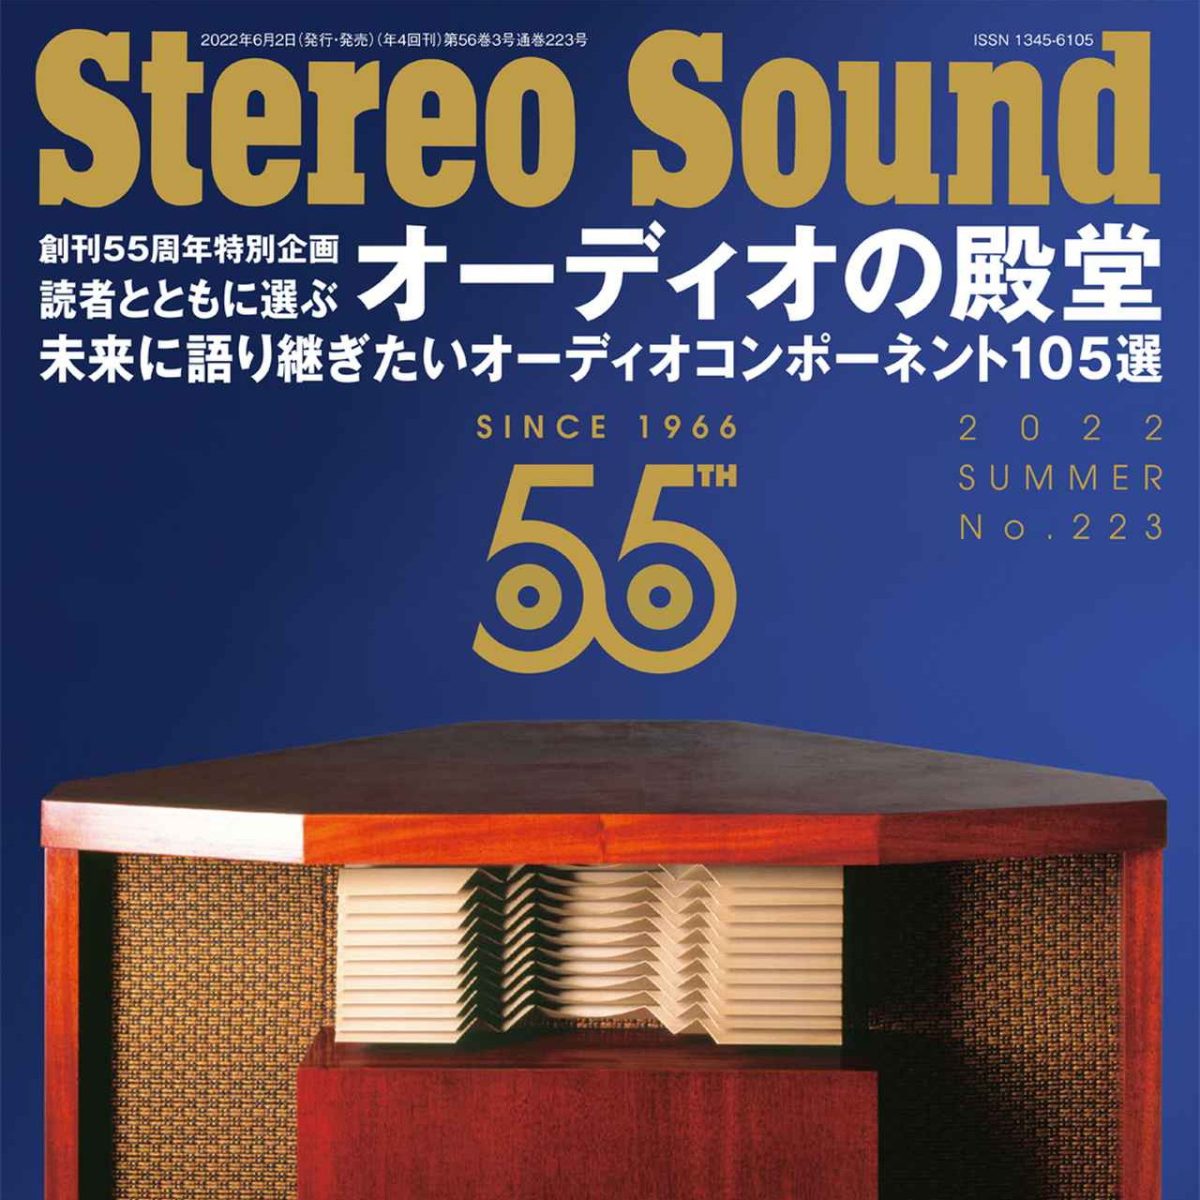 „STEREO SOUND” № 223 ⸜ Summer 2022